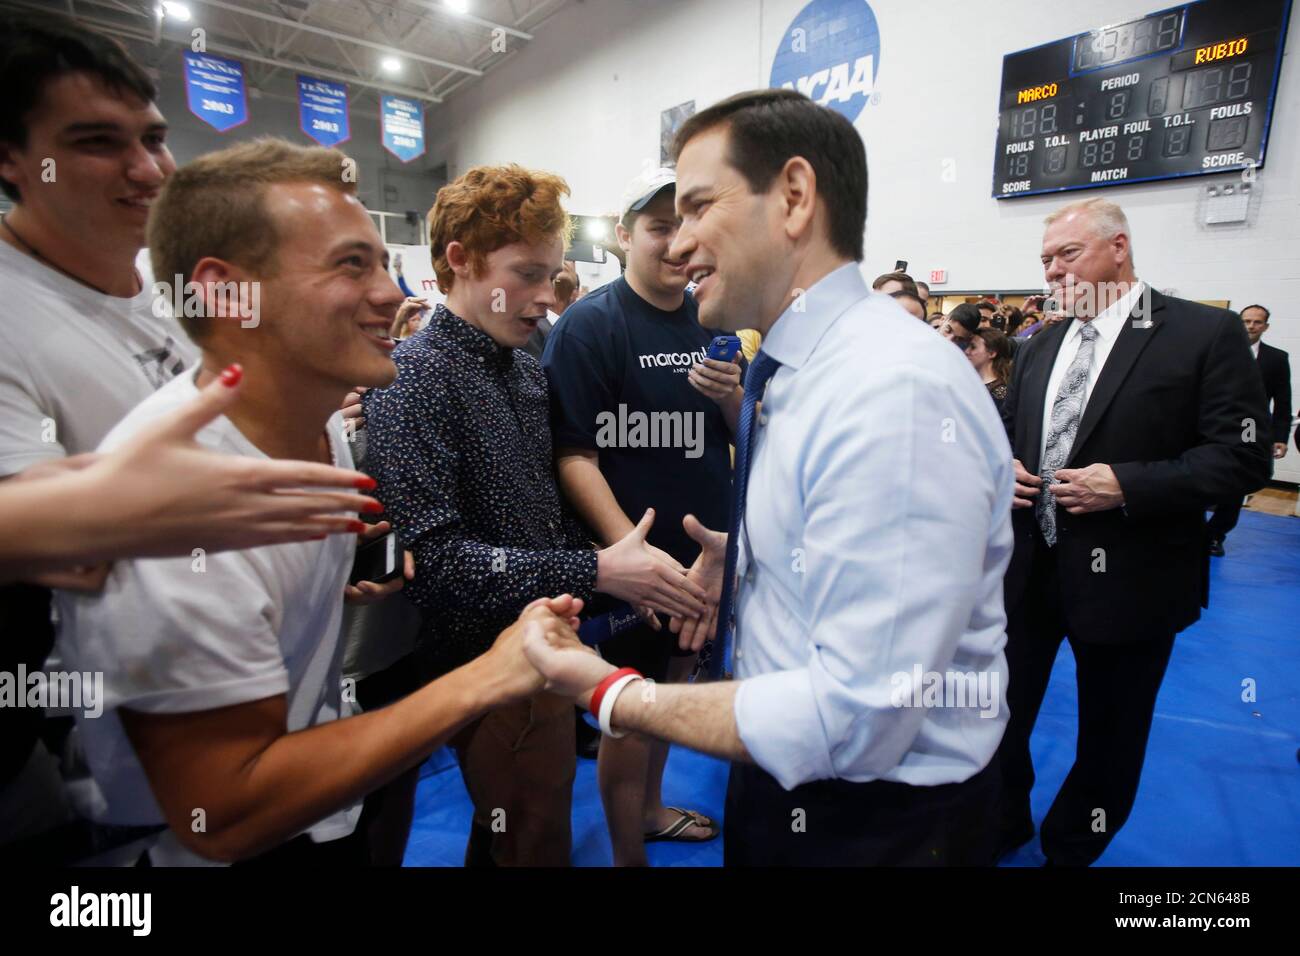 Republican U.S. presidential candidate Marco Rubio shakes hands with supporters at a campaign event at Palm Beach Atlantic University in West Palm Beach, Florida March 14, 2016.     REUTERS/Carlo Allegri Stock Photo